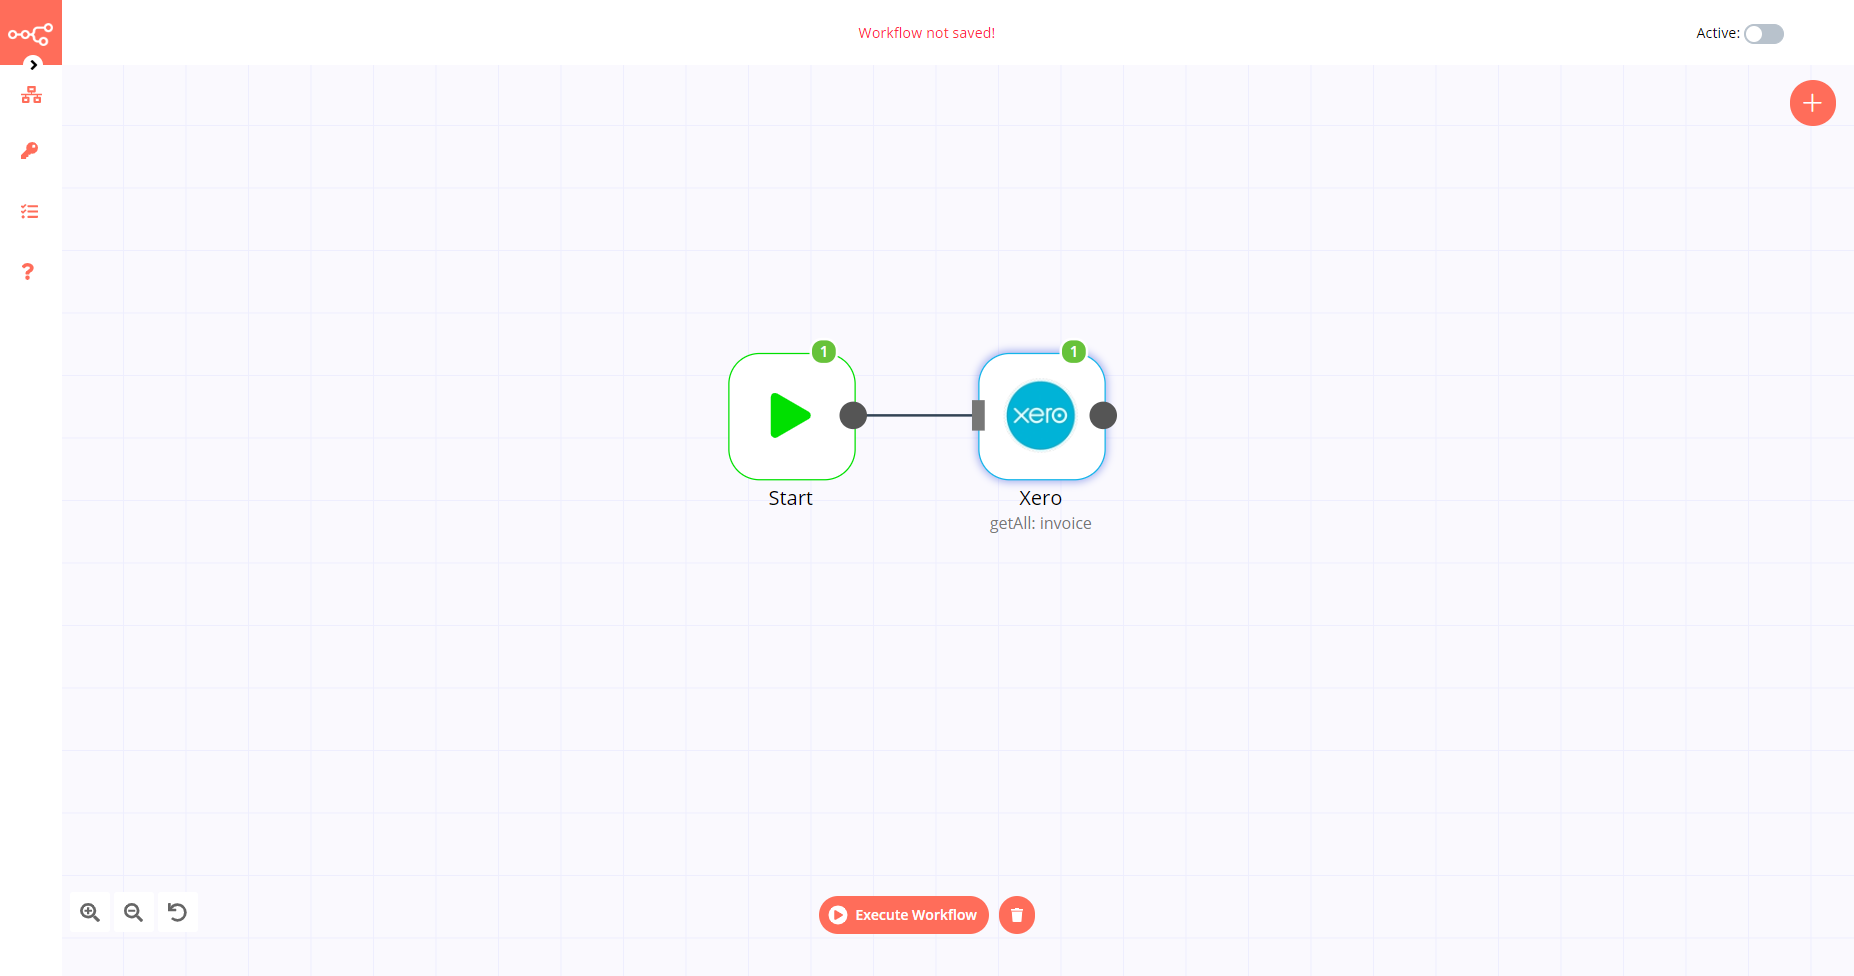 A workflow with the Xero node